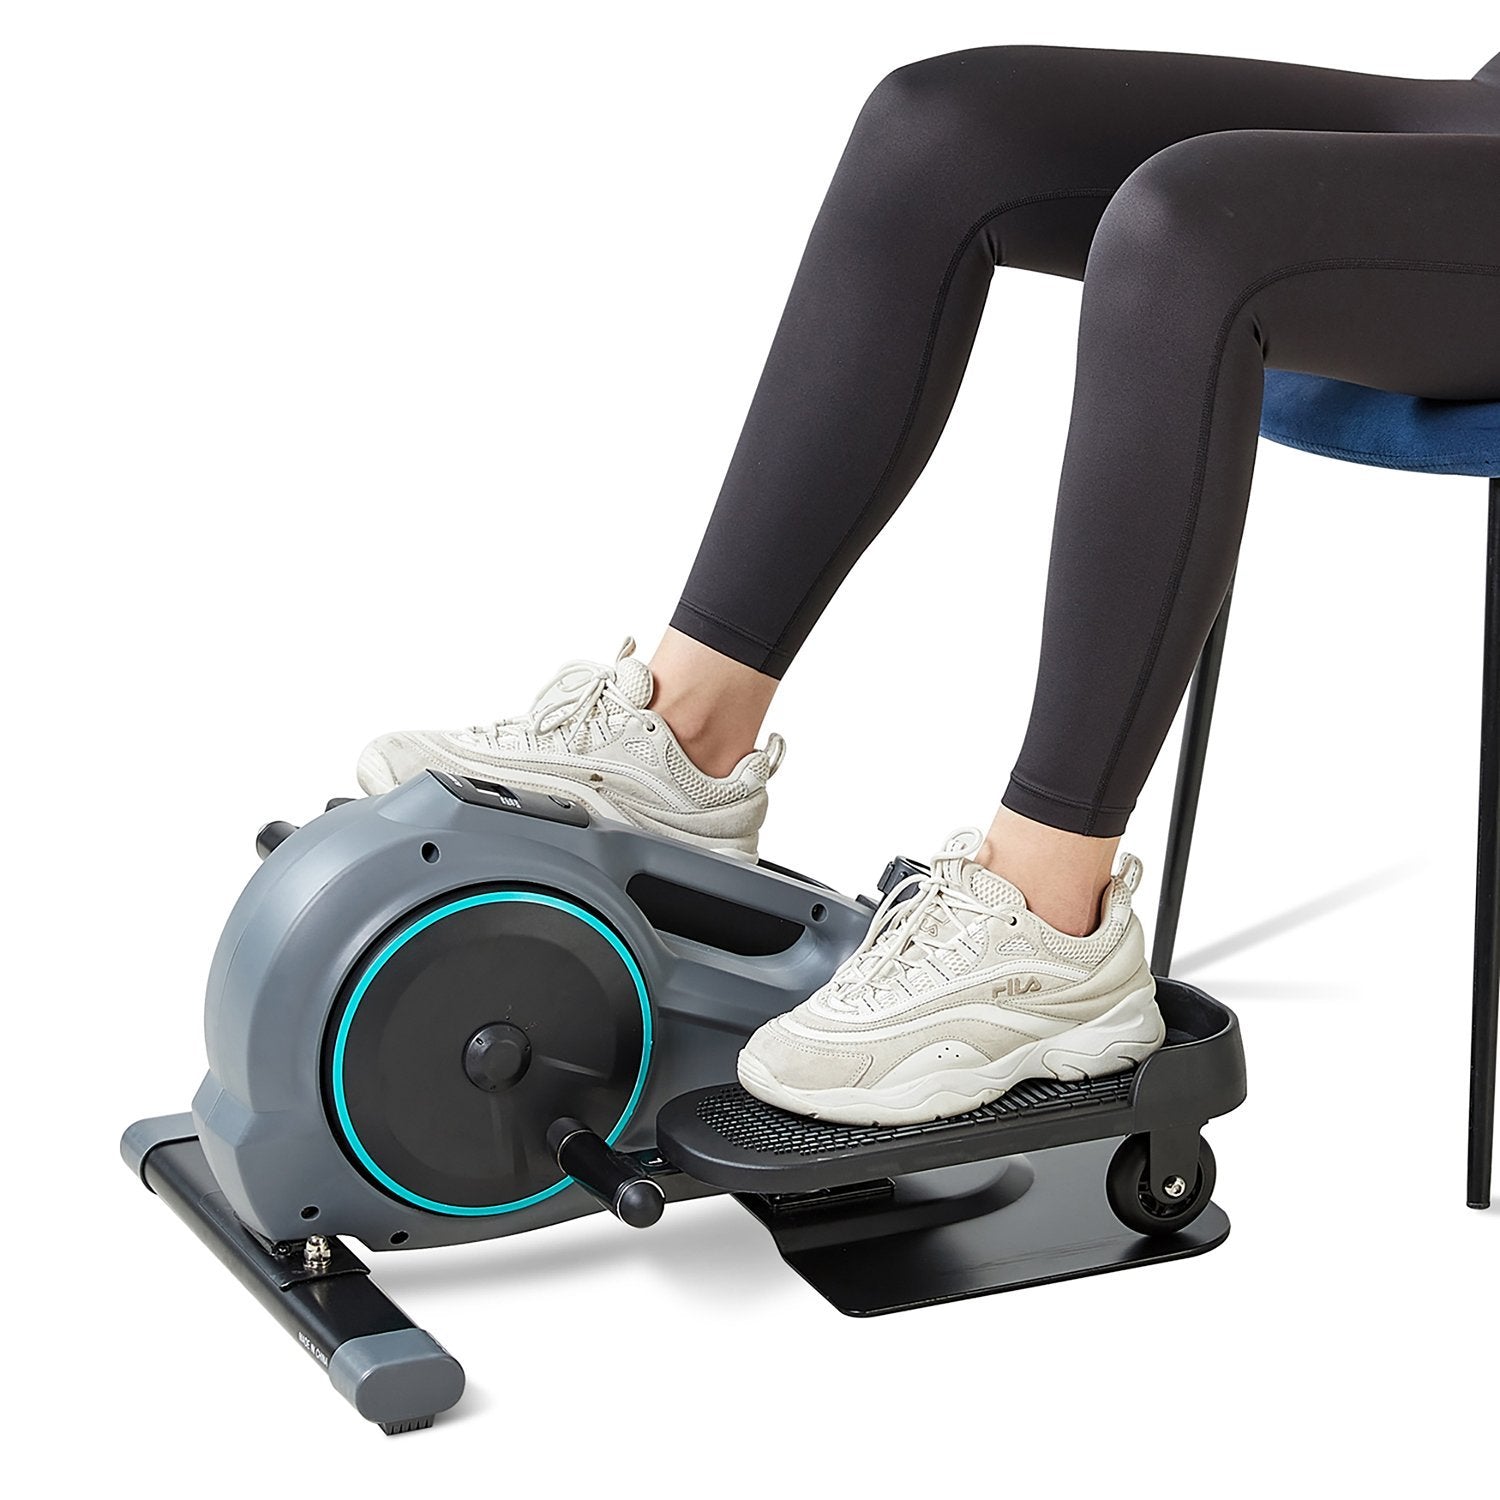 https://www.marnur.net/cdn/shop/products/maxkare-under-desk-elliptical-machine-mini-elliptical-exercise-trainer-with-adjustable-resistancemultifunctional-lcd-screen-at-home-for-men-and-womengrey-958768_1500x.jpg?v=1626767173